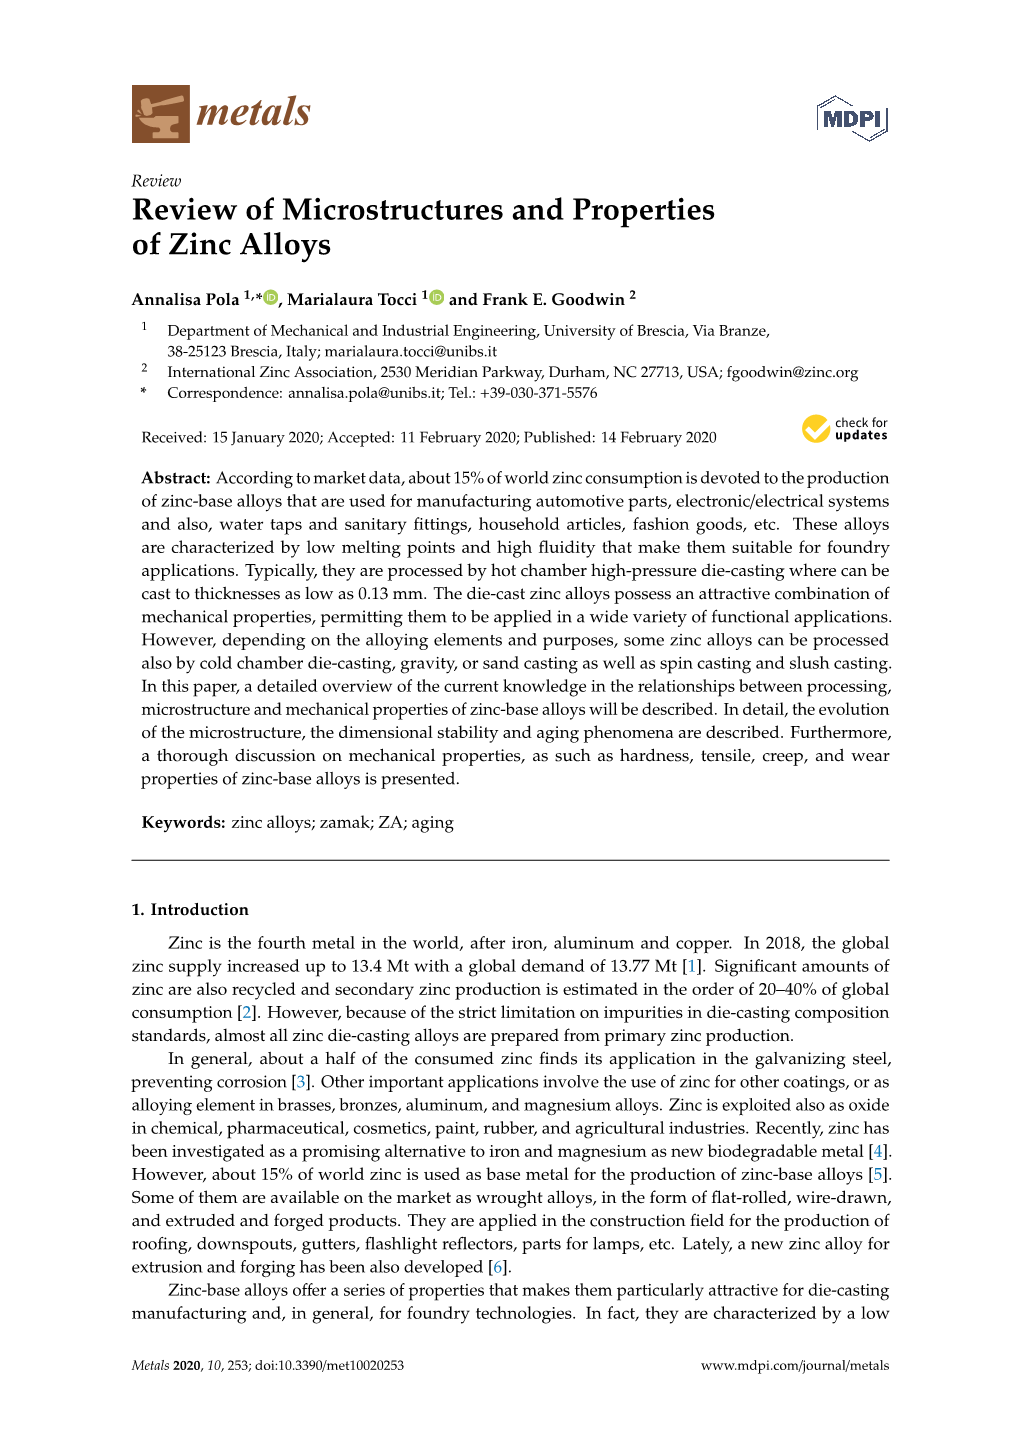 Review of Microstructures and Properties of Zinc Alloys